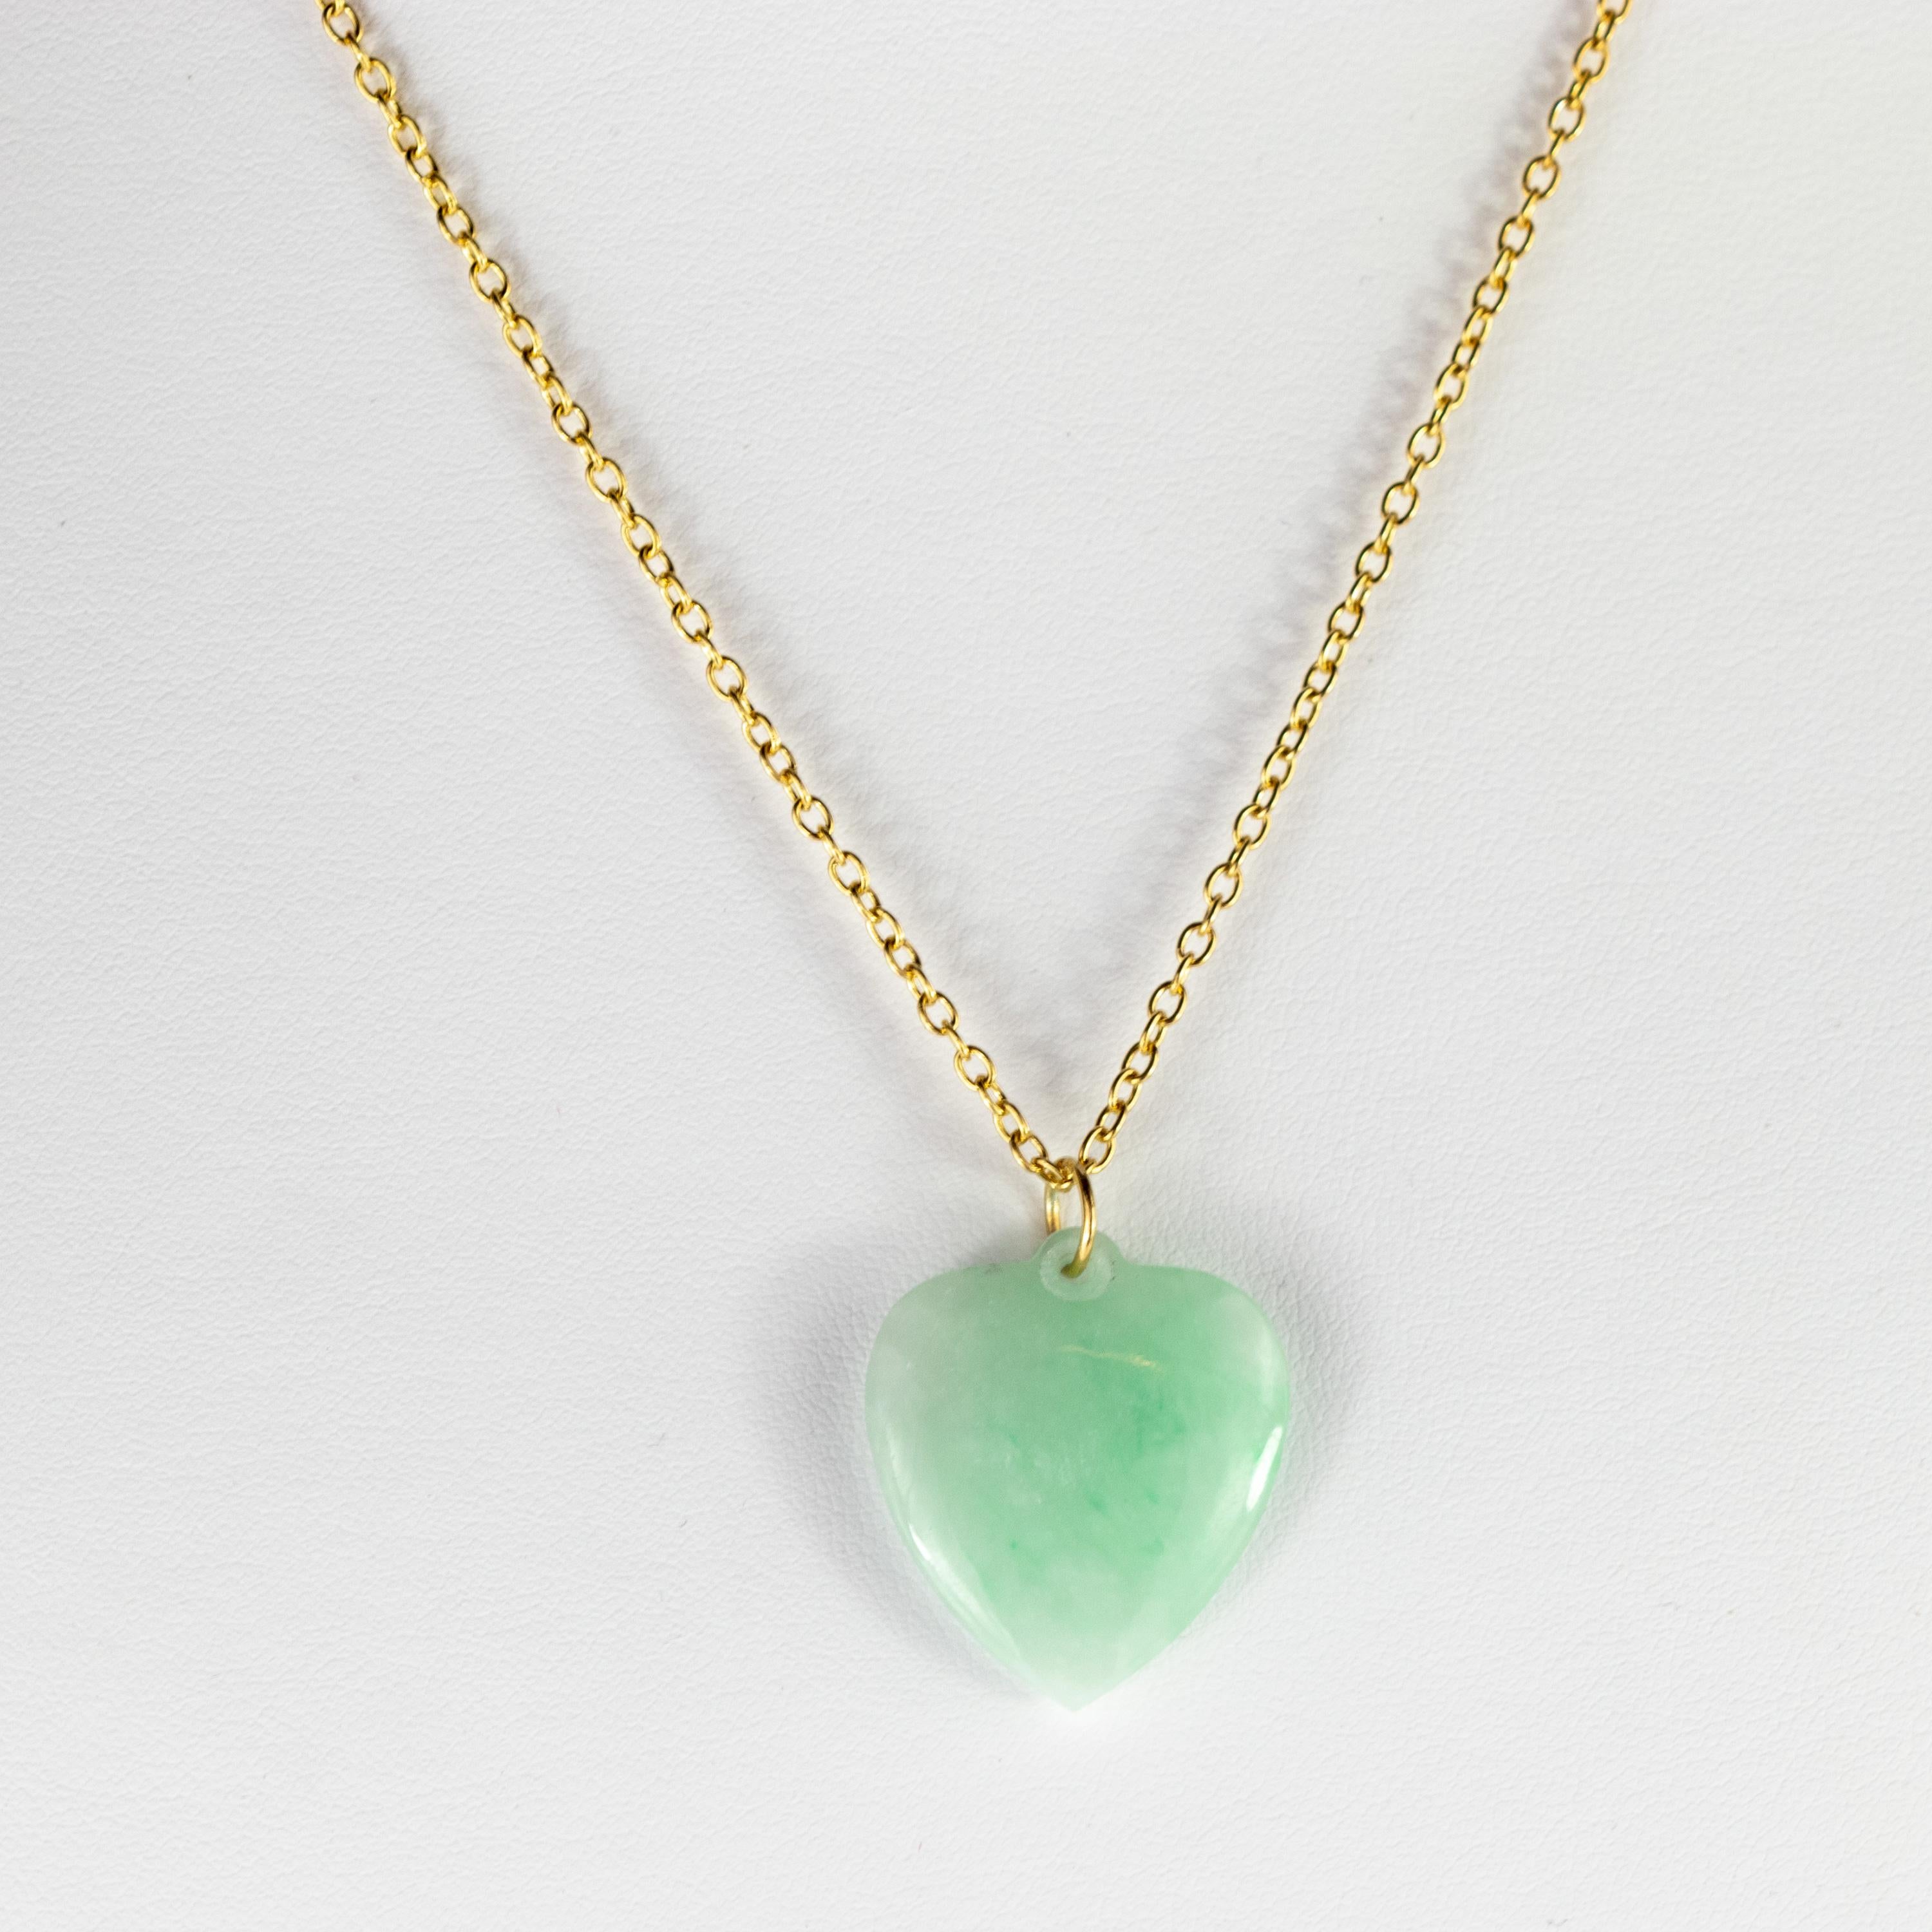 Take love with you everywhere! This breathtaking necklace has a sweet design with the most precious gemstone hanging from a delicate gilded silver chain. The Natural 29 carats Jade activates spiritual awareness, opens intuition and enhances your